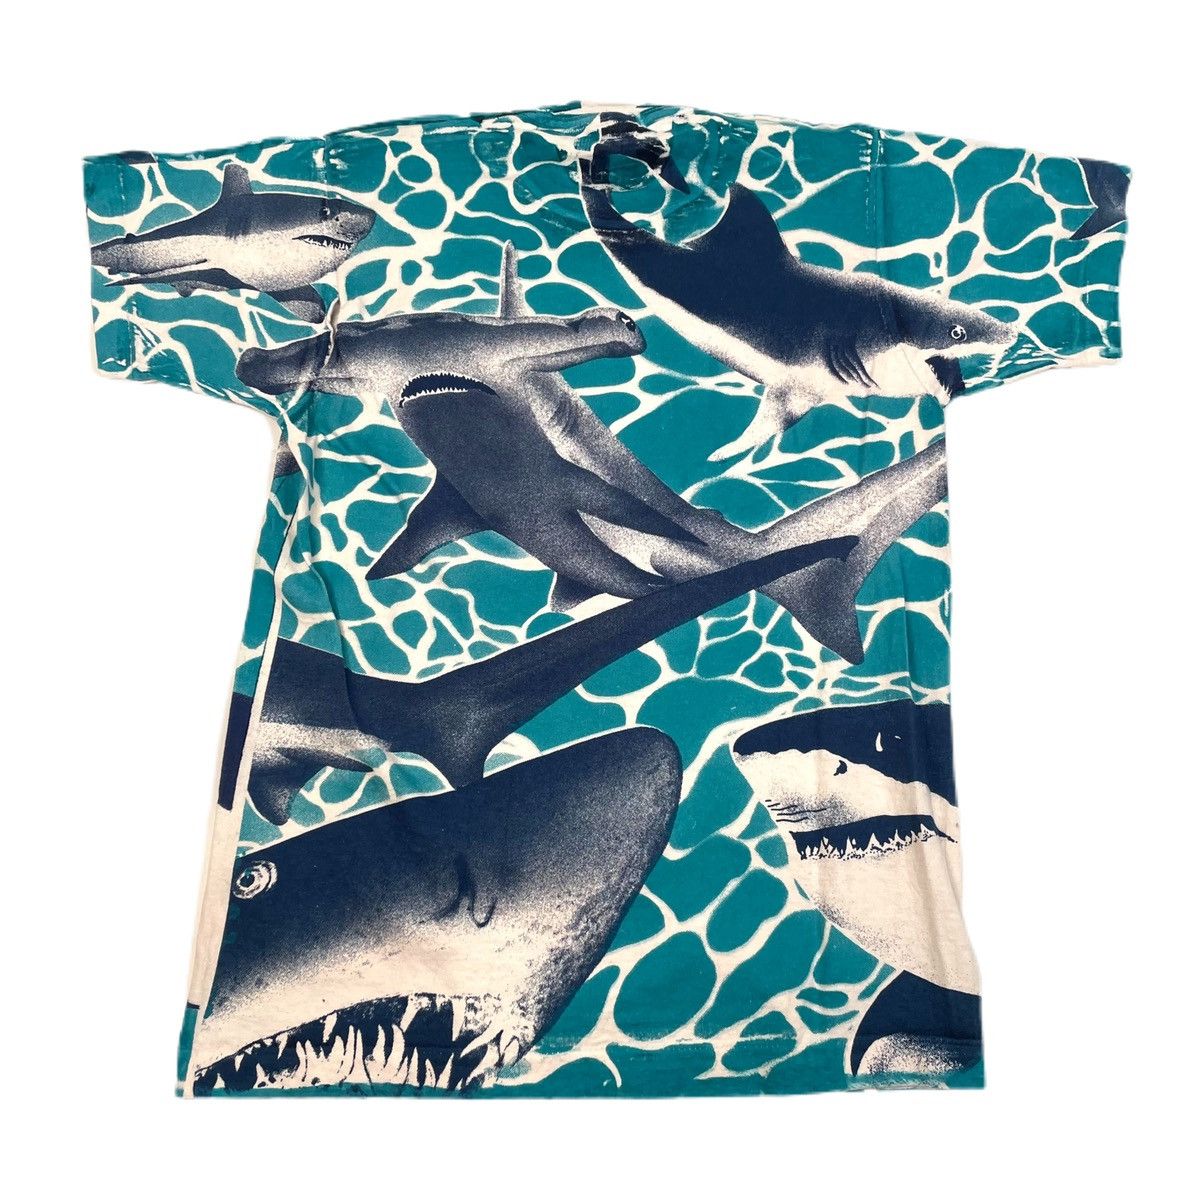 Vintage Shark species all over print single stitch graphic t-shirt Size US S / EU 44-46 / 1 - 2 Preview